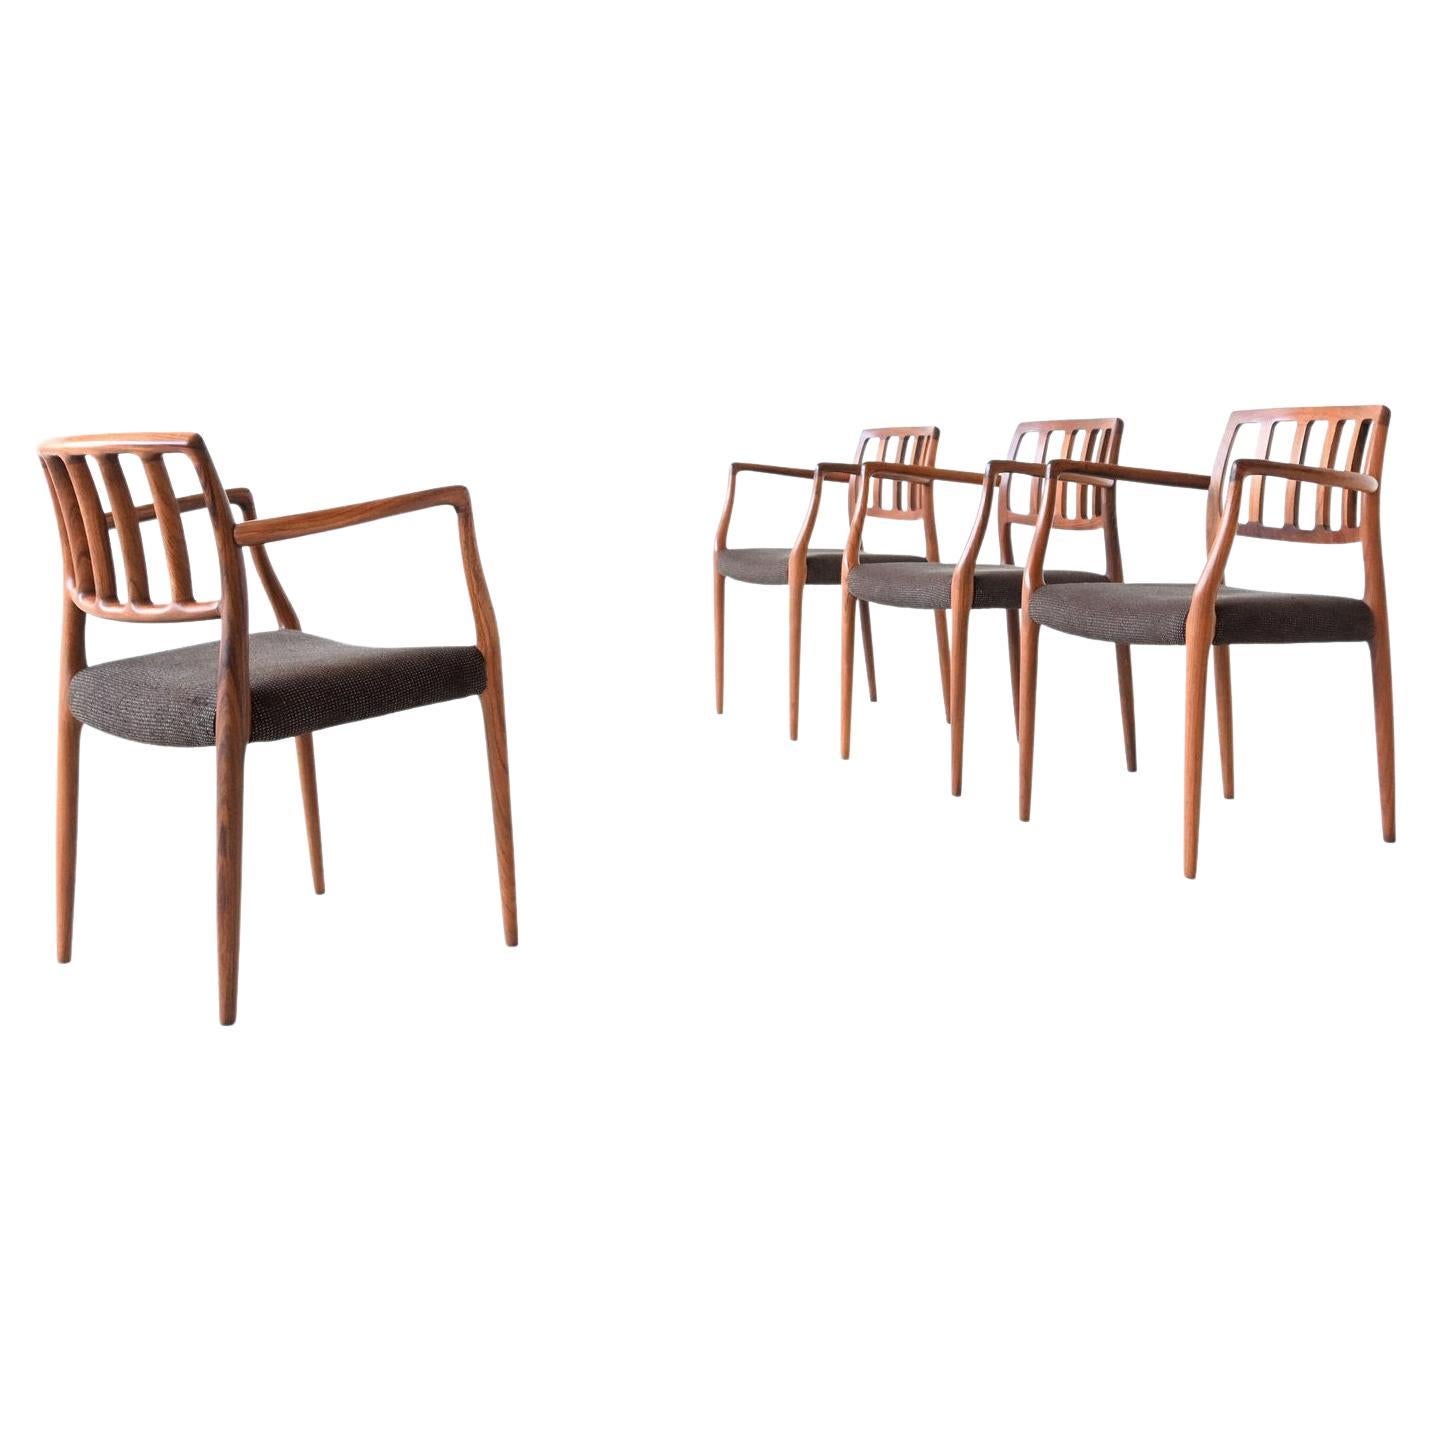 Niels Otto Moller Model 66 Rosewood Armchairs, Denmark, 1974